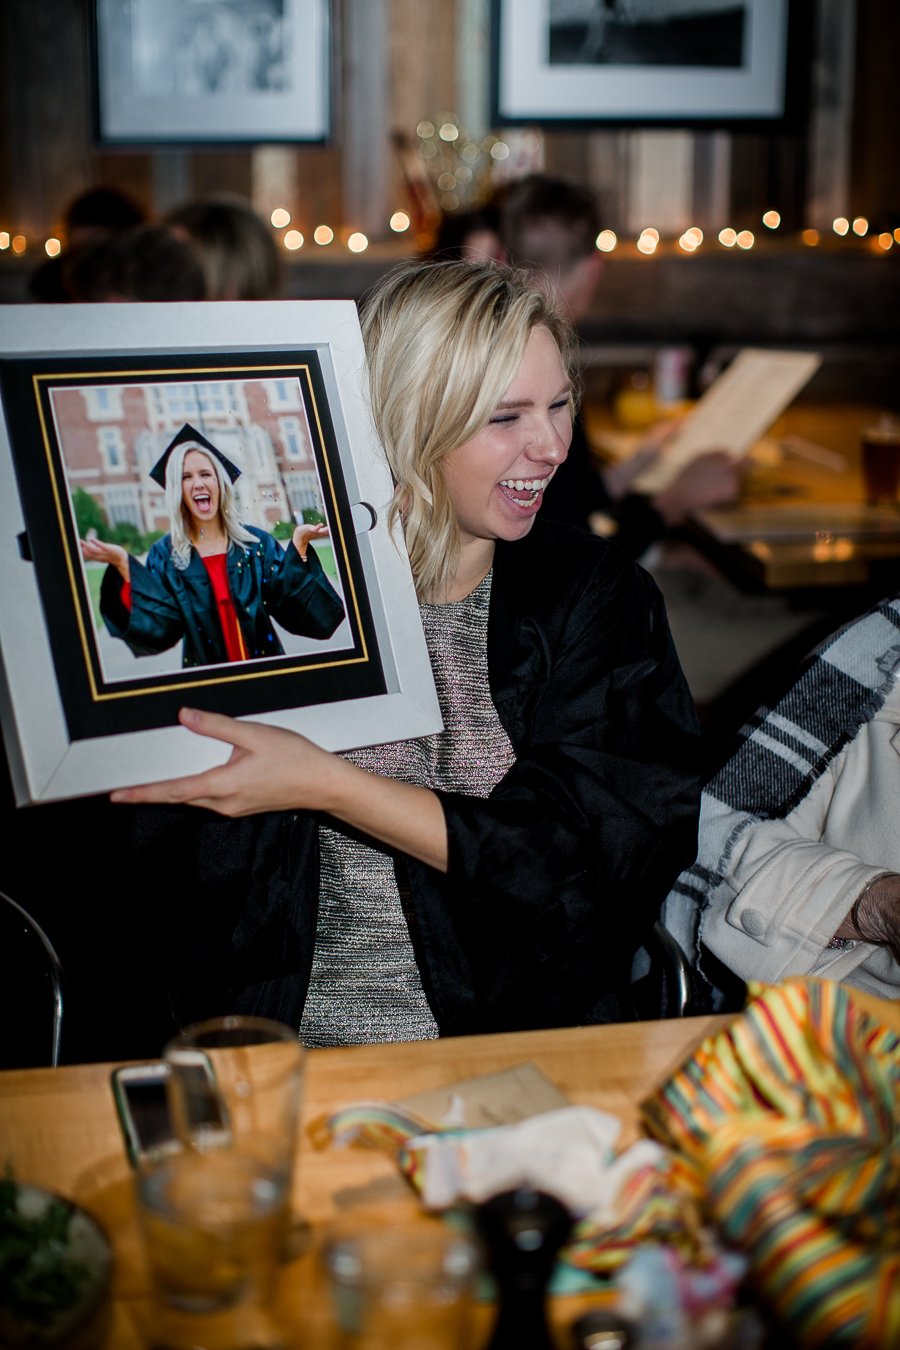 Holding up her book at this dinner at Sunspot after the University of Tennessee graduation by Amanda May Photos.